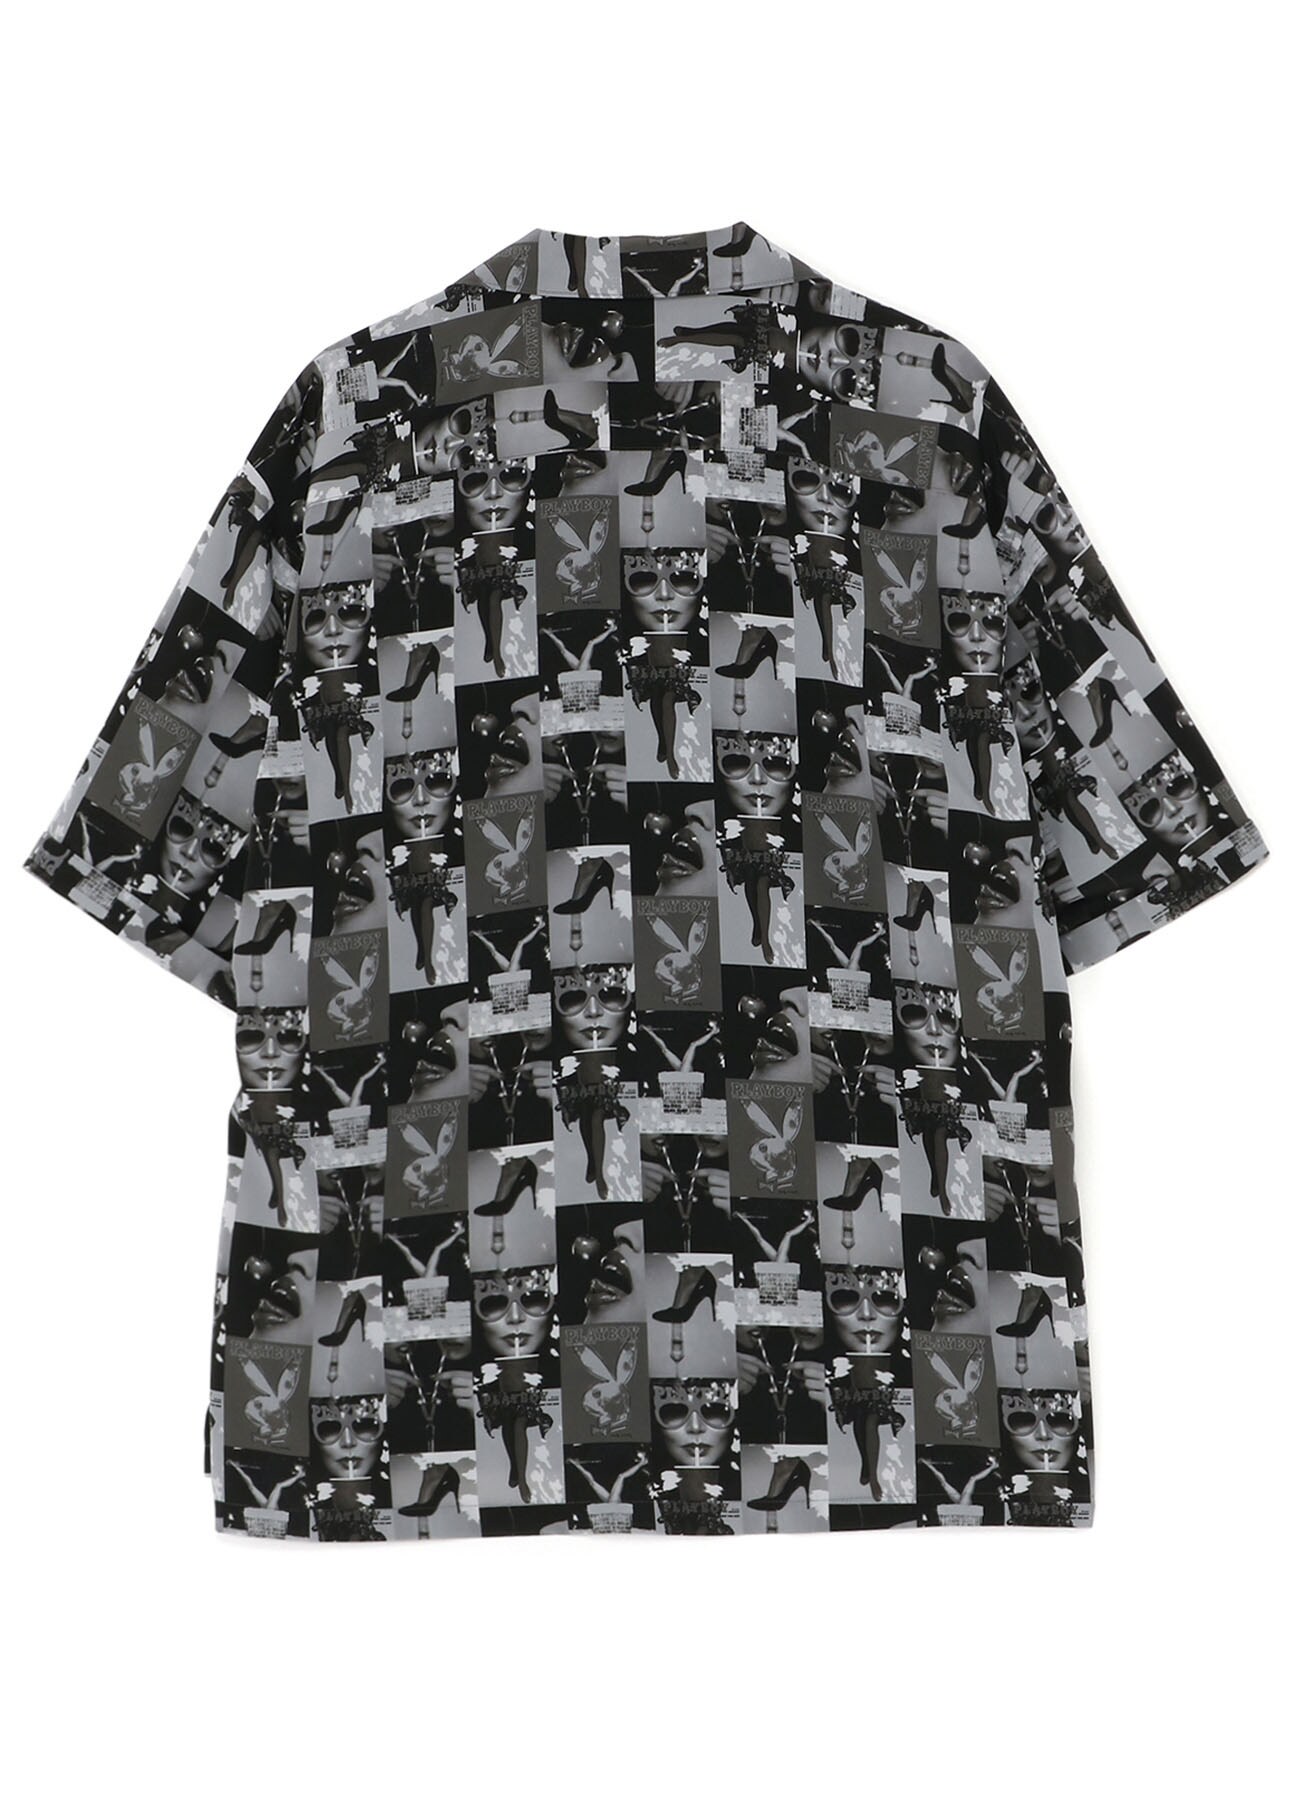 PLAYBOY×S’YTE Cover Best Collage Big Short Sleeve Shirt